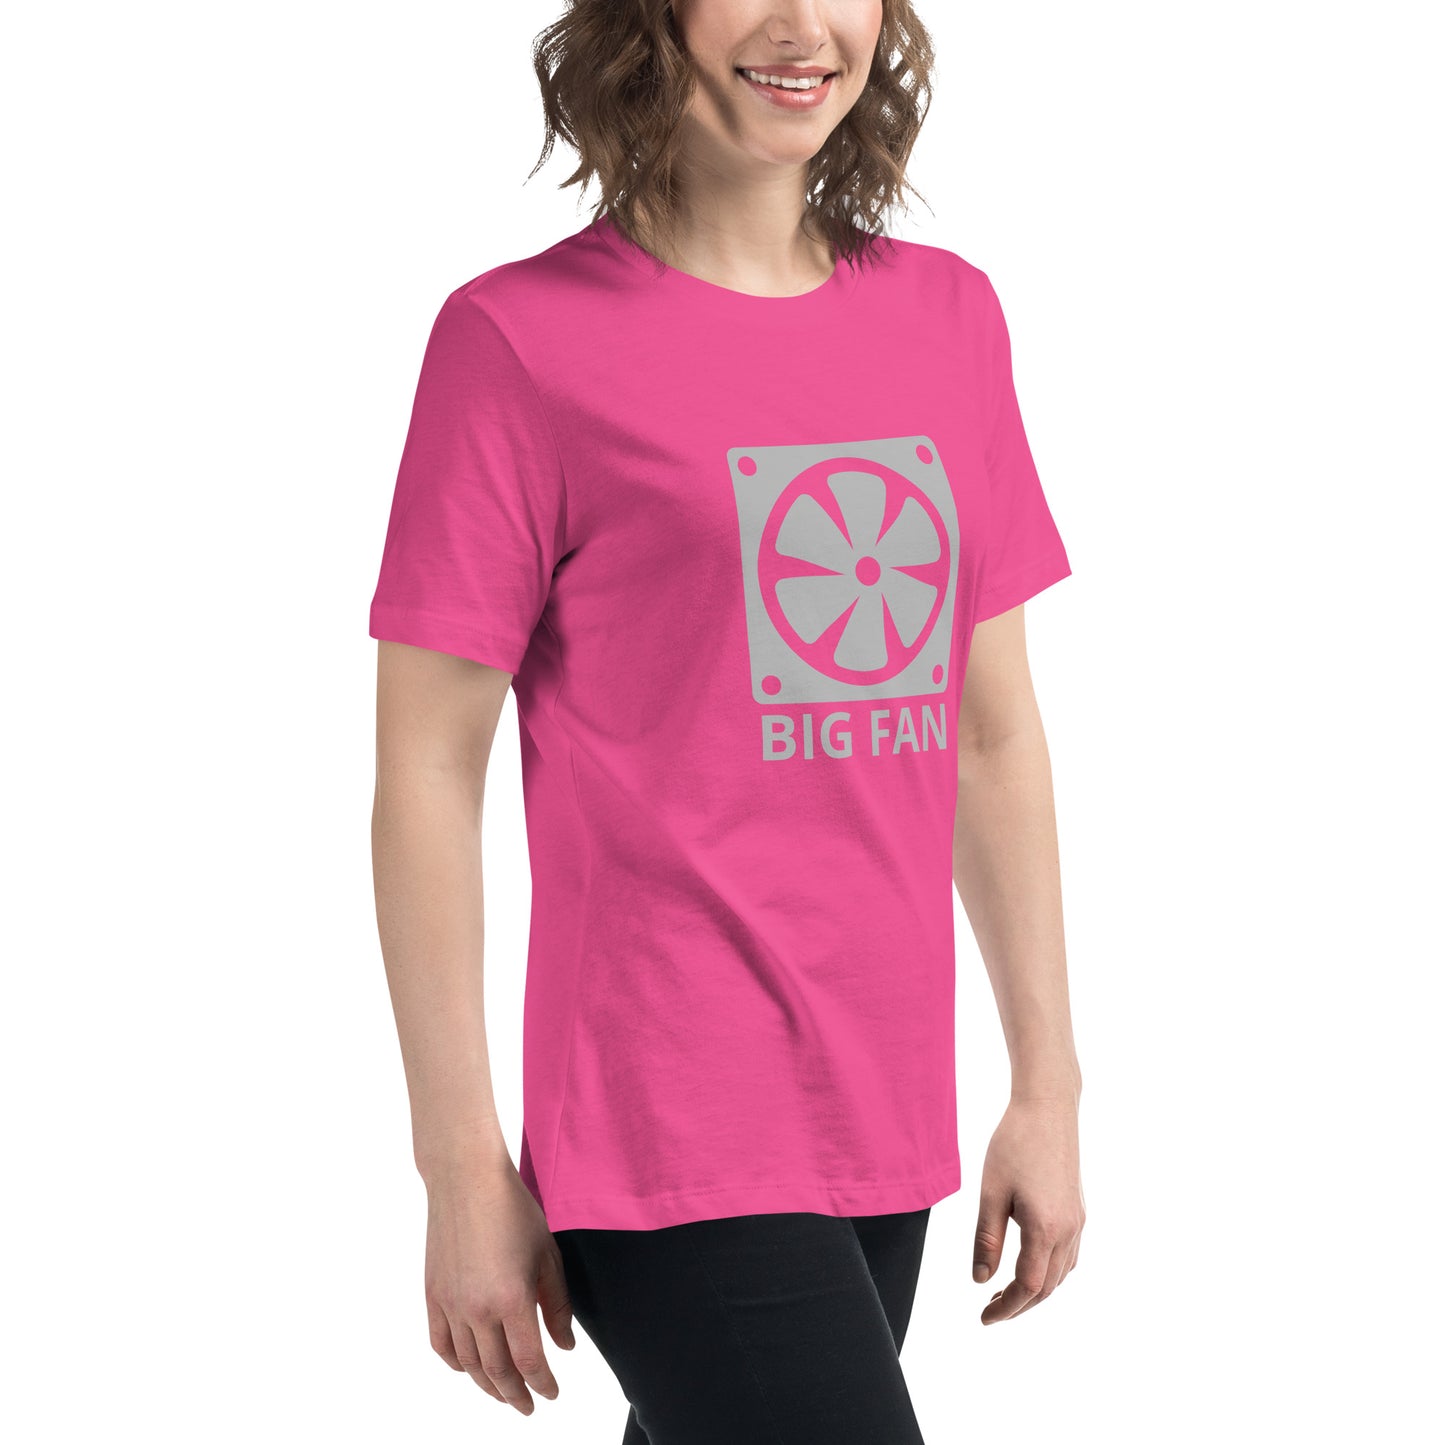 Women with berry t-shirt with image of a big computer fan and the text "BIG FAN"